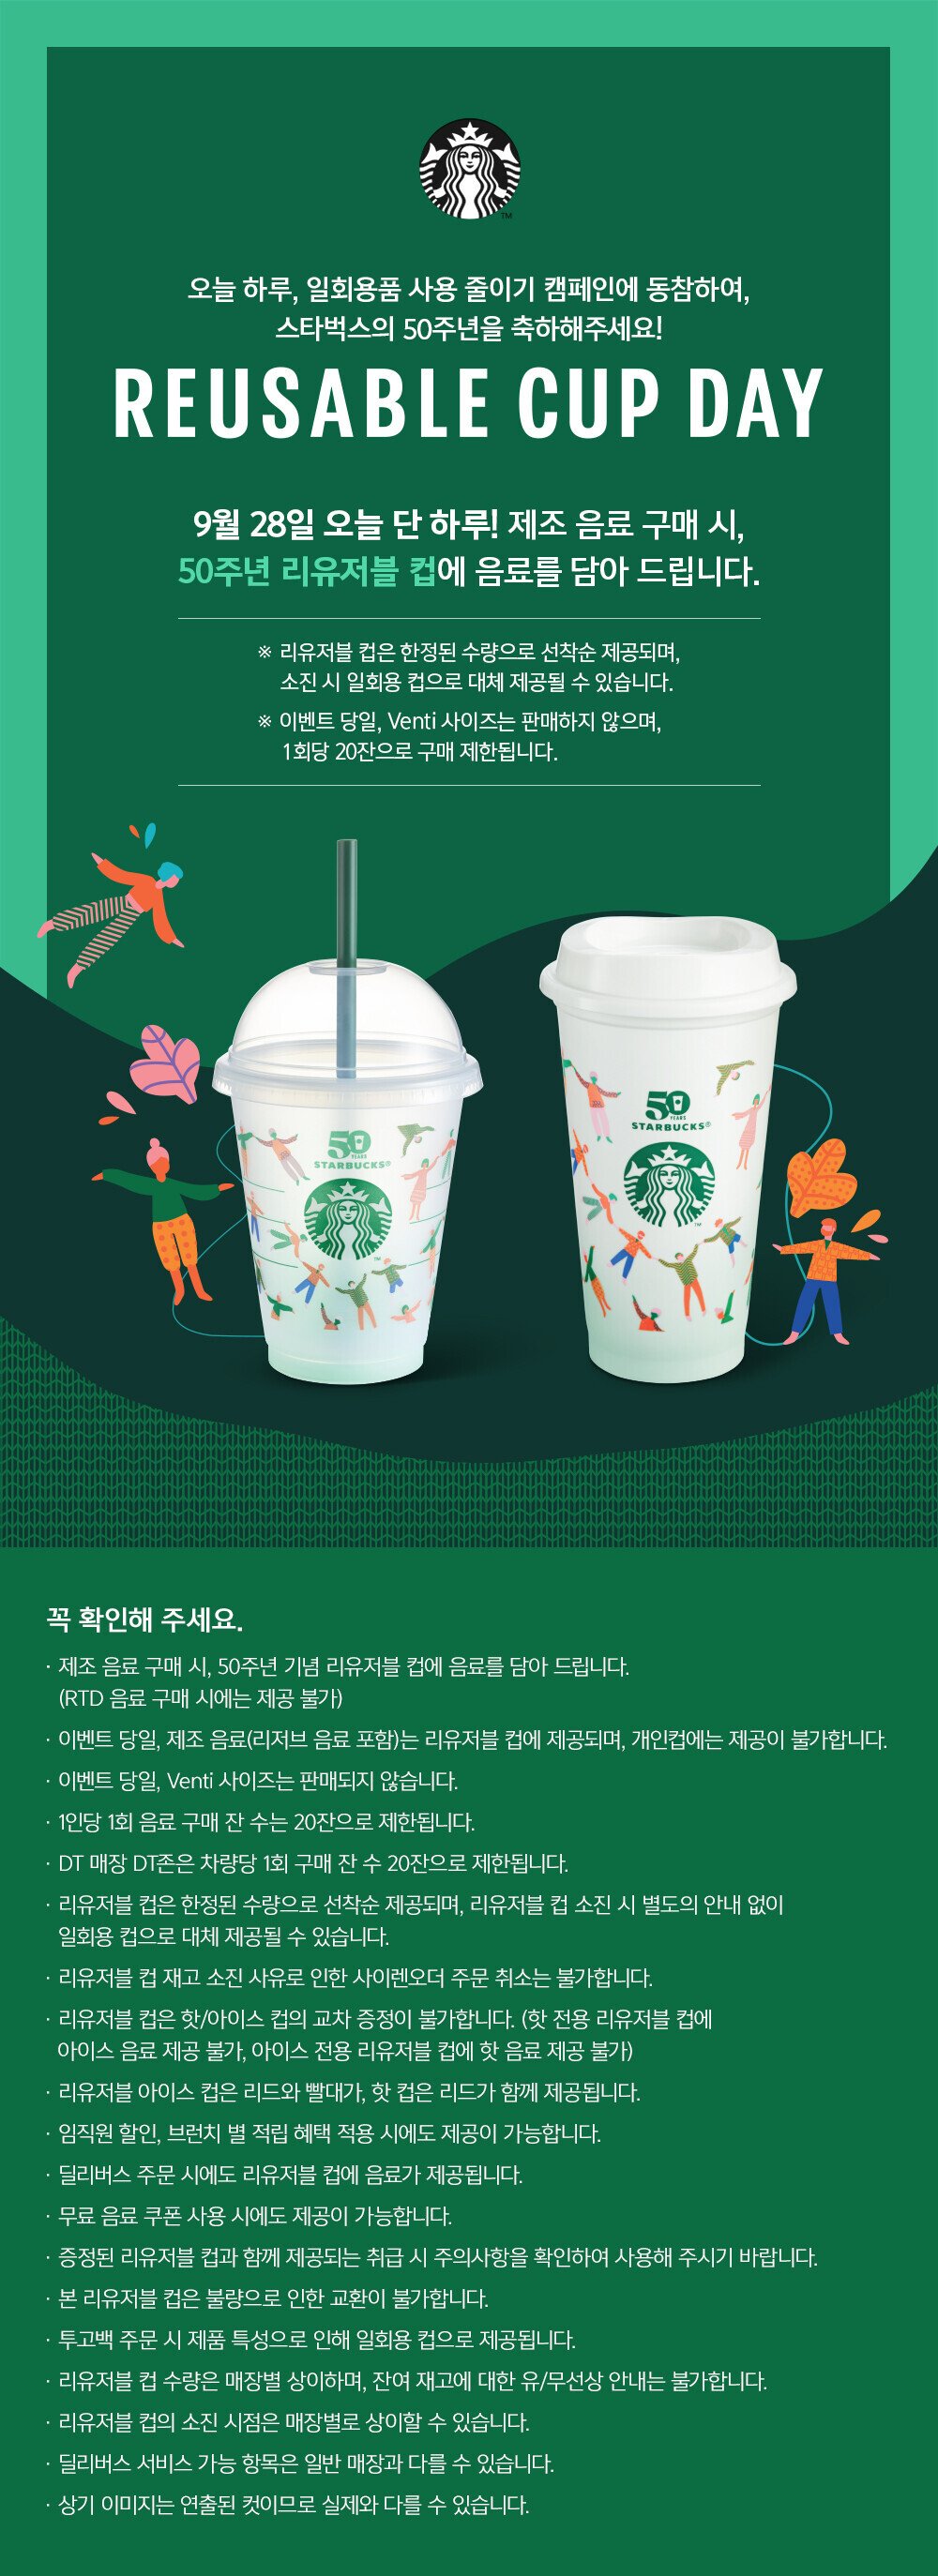 If you buy Starbucks today, you will get a reusable cup.